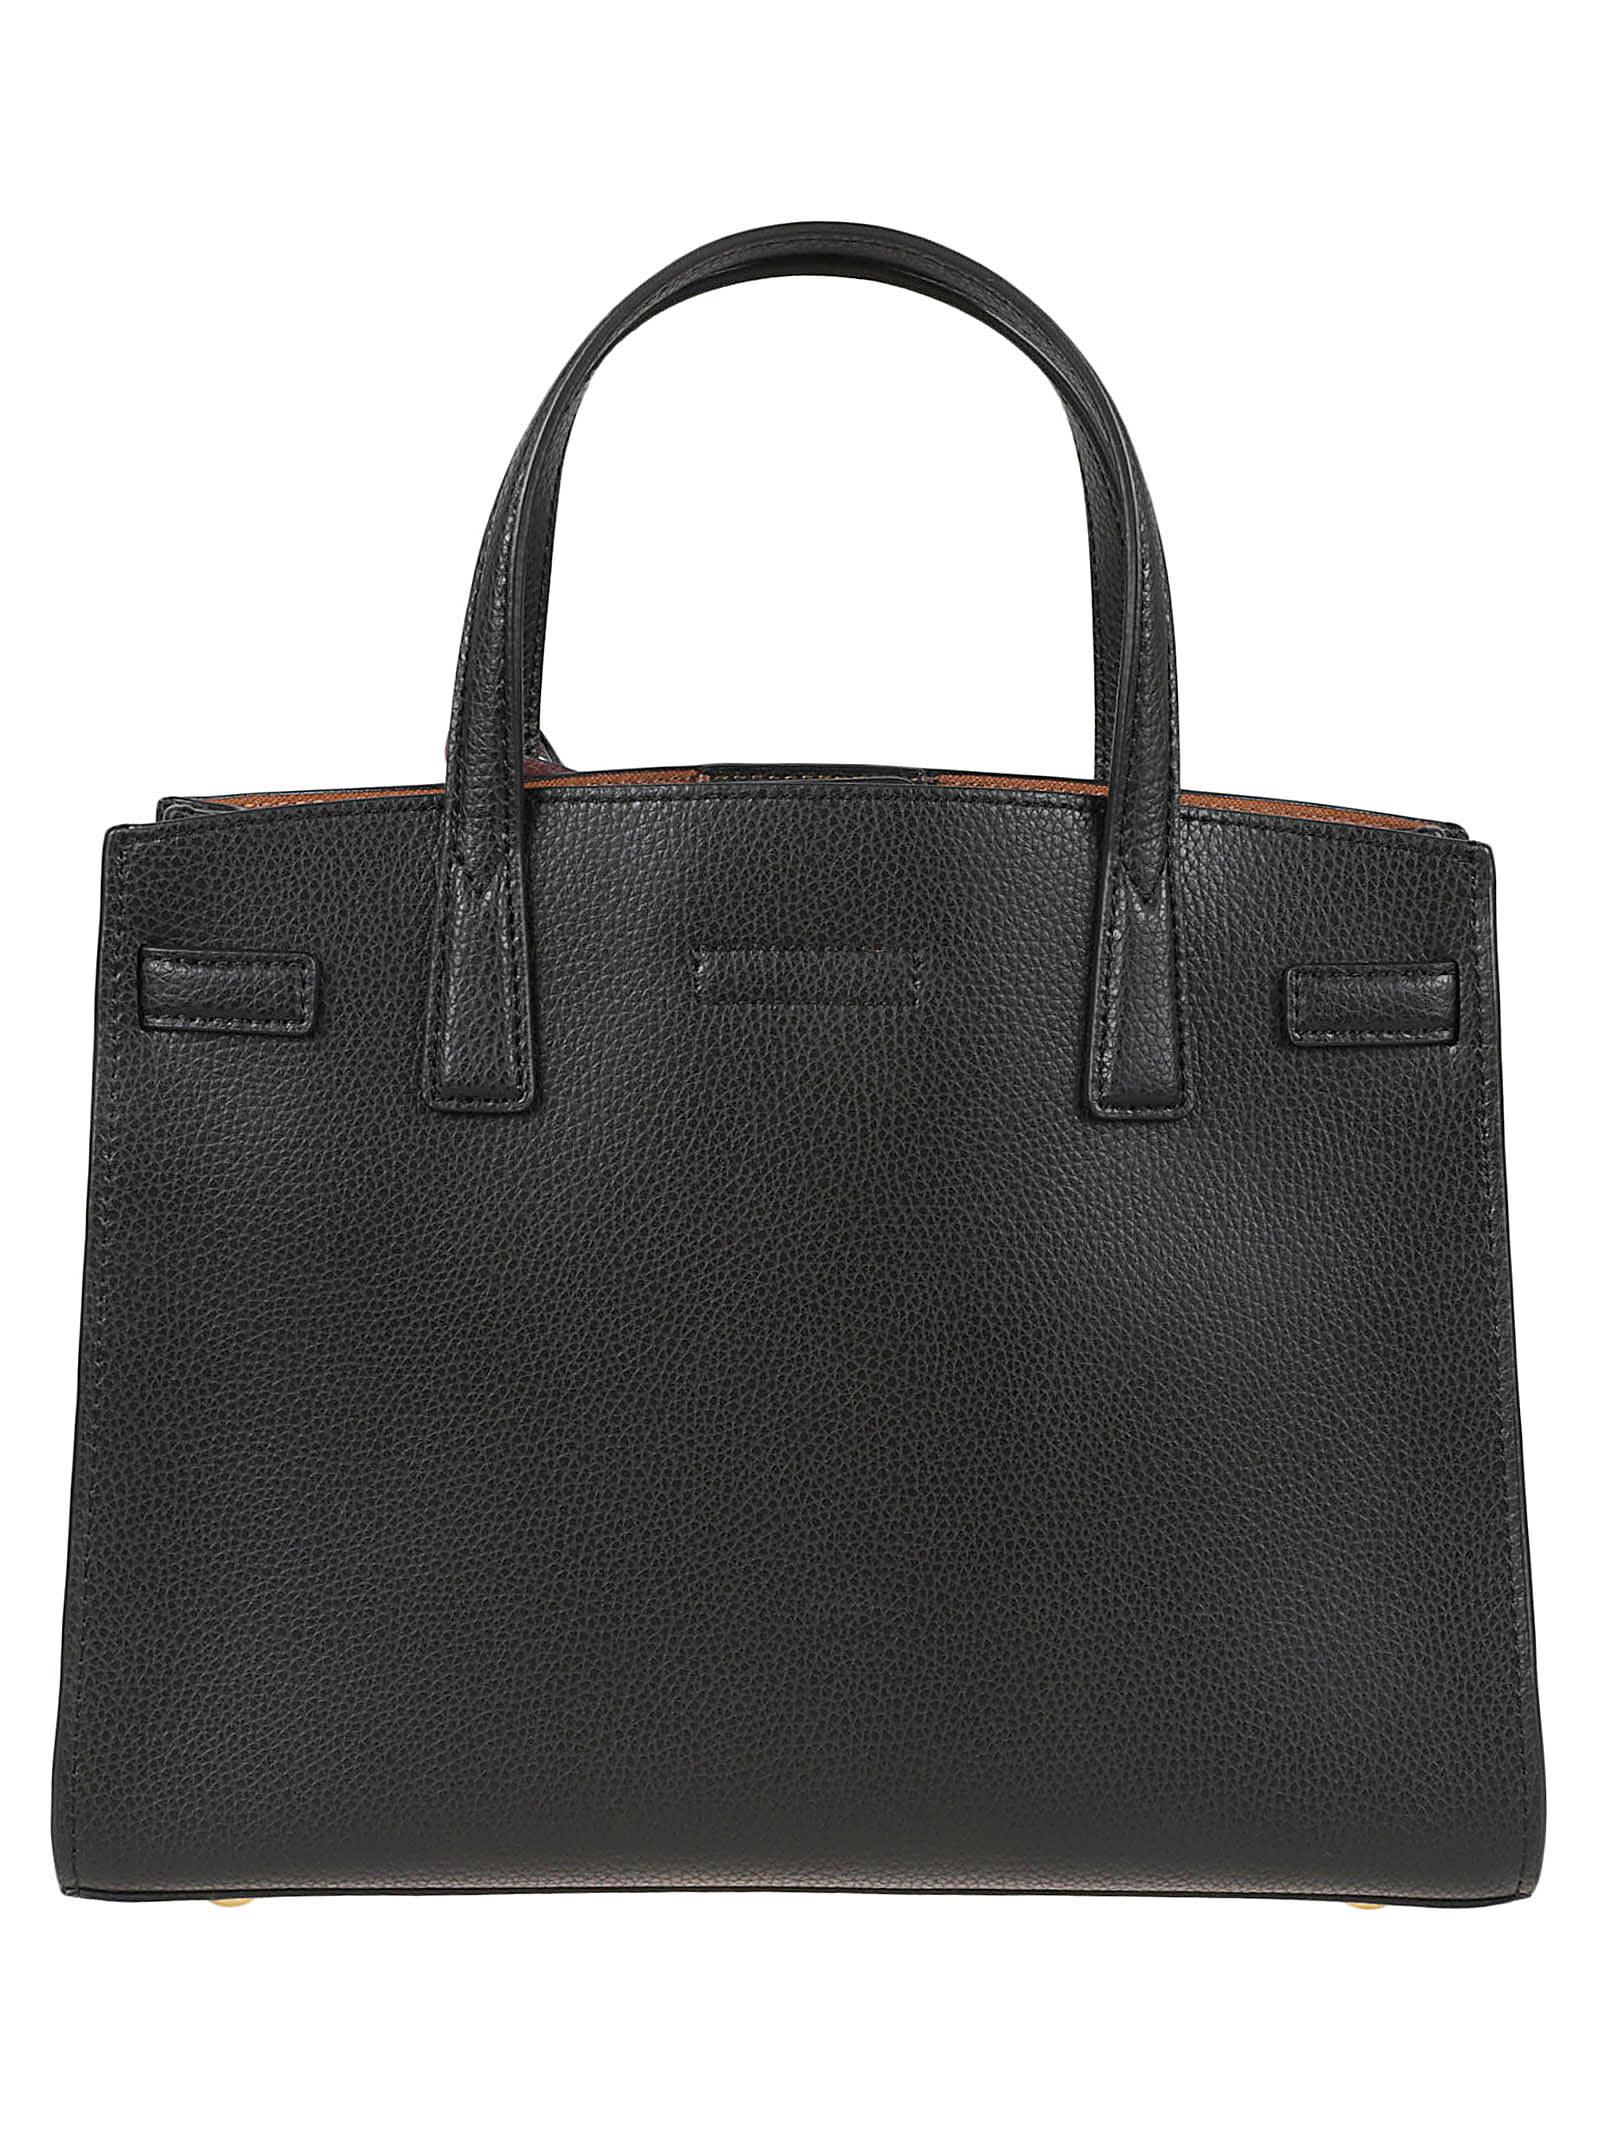 Tory Burch Robinson Small Leather Tote In Black